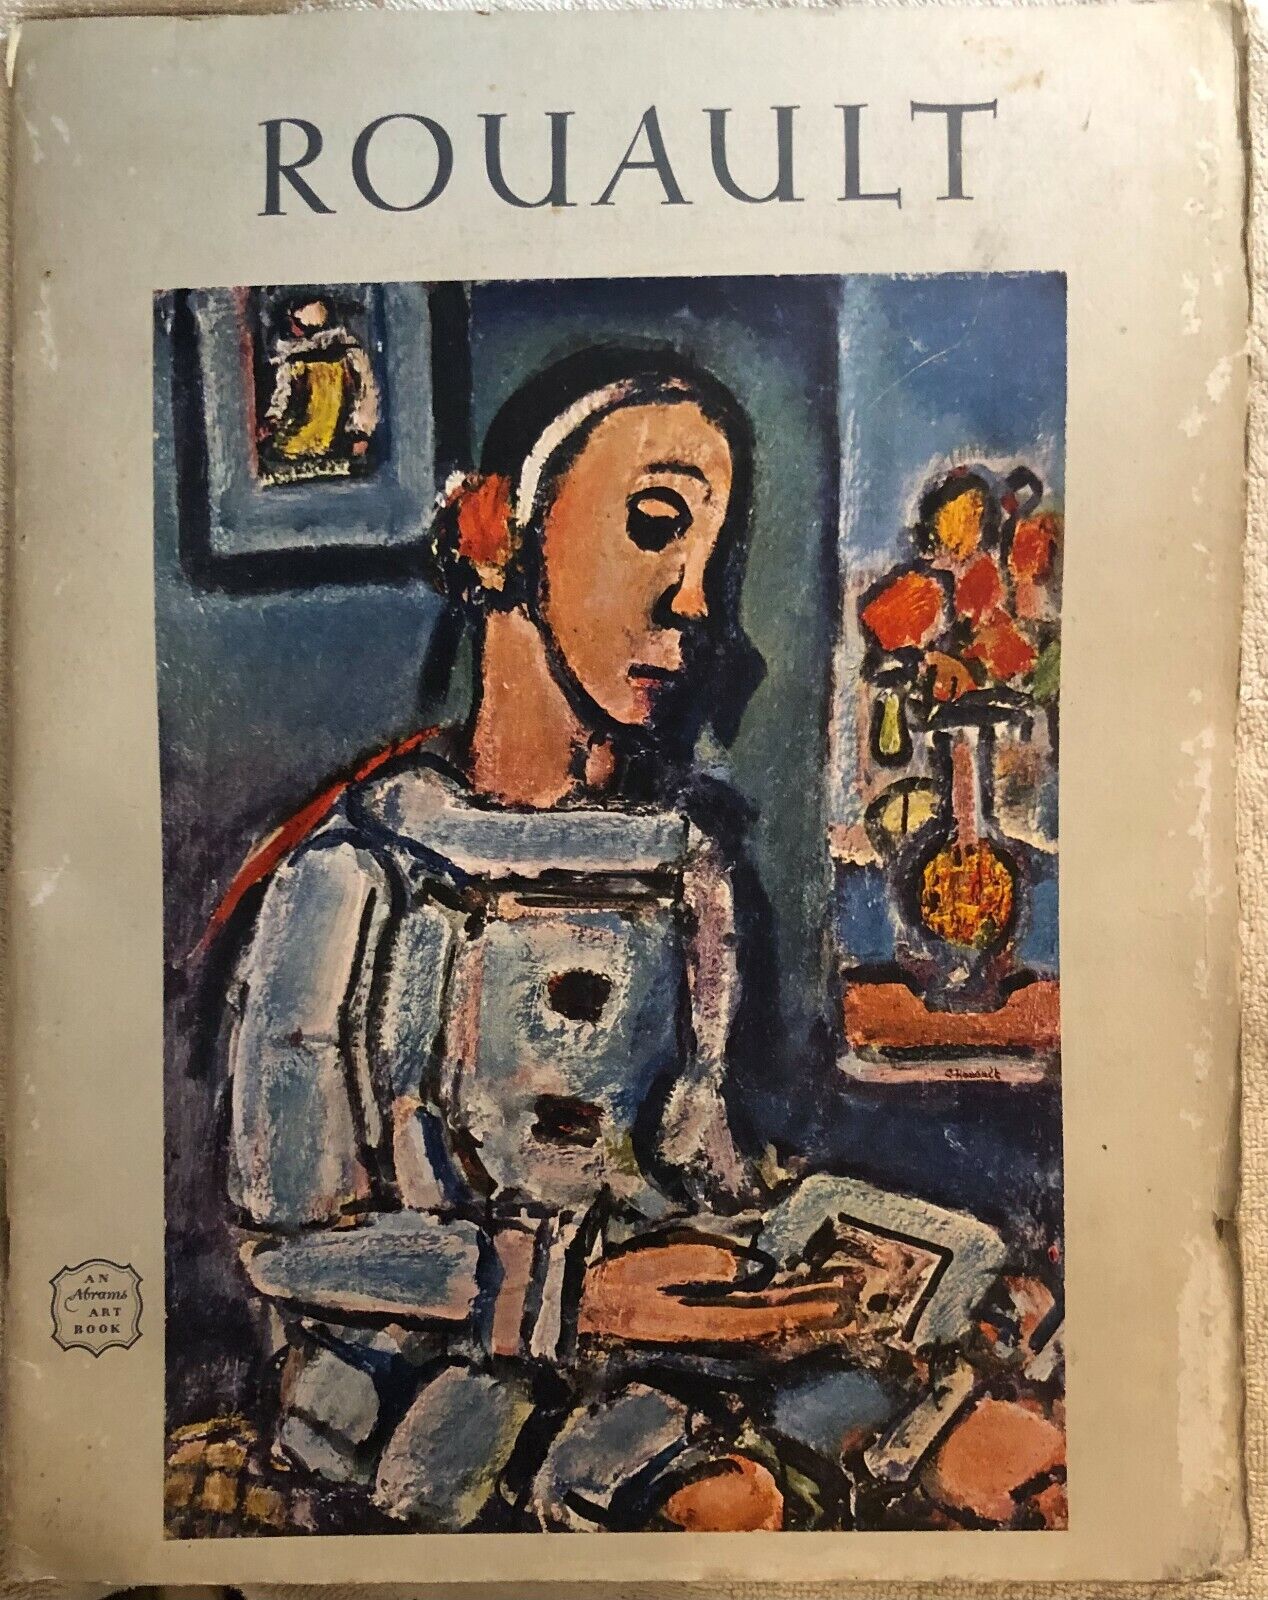 Rouault di Jacques Maritain,  1952,  Harry N. Abrams Publishers New York